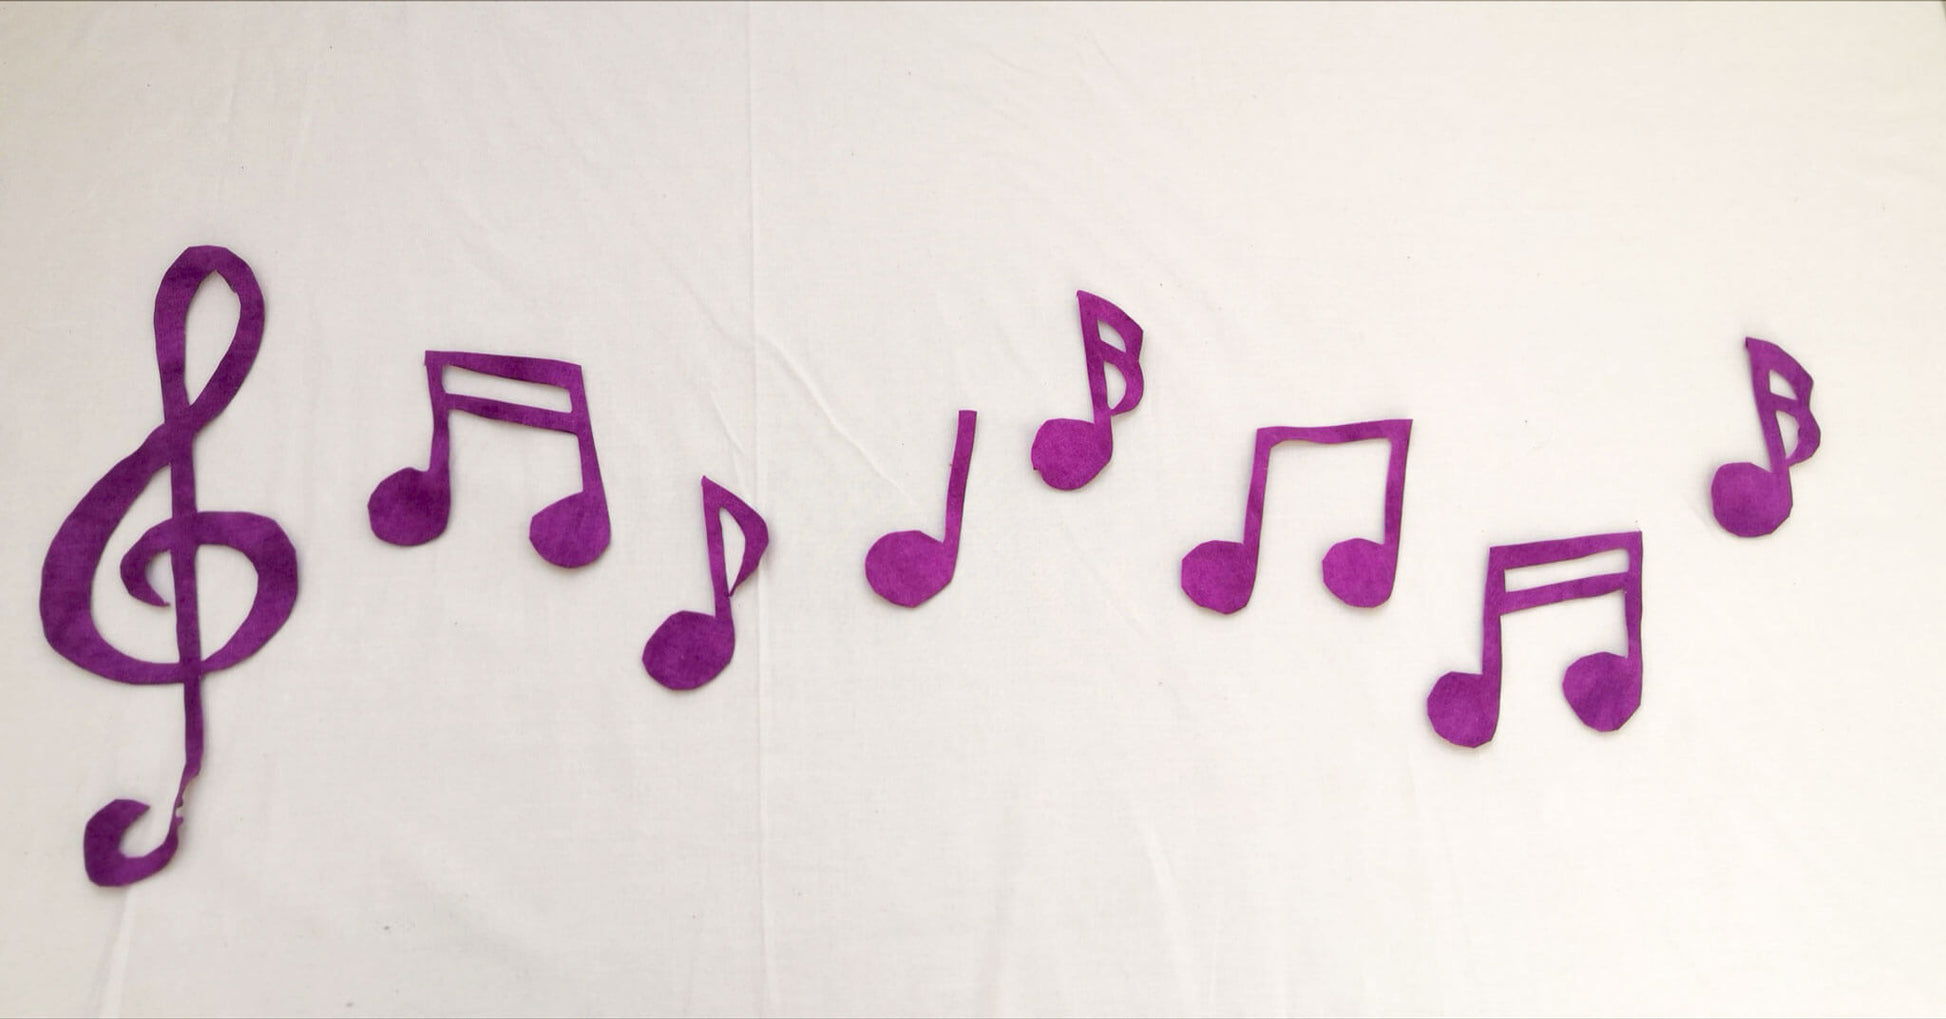 Music key and music note applique pieces